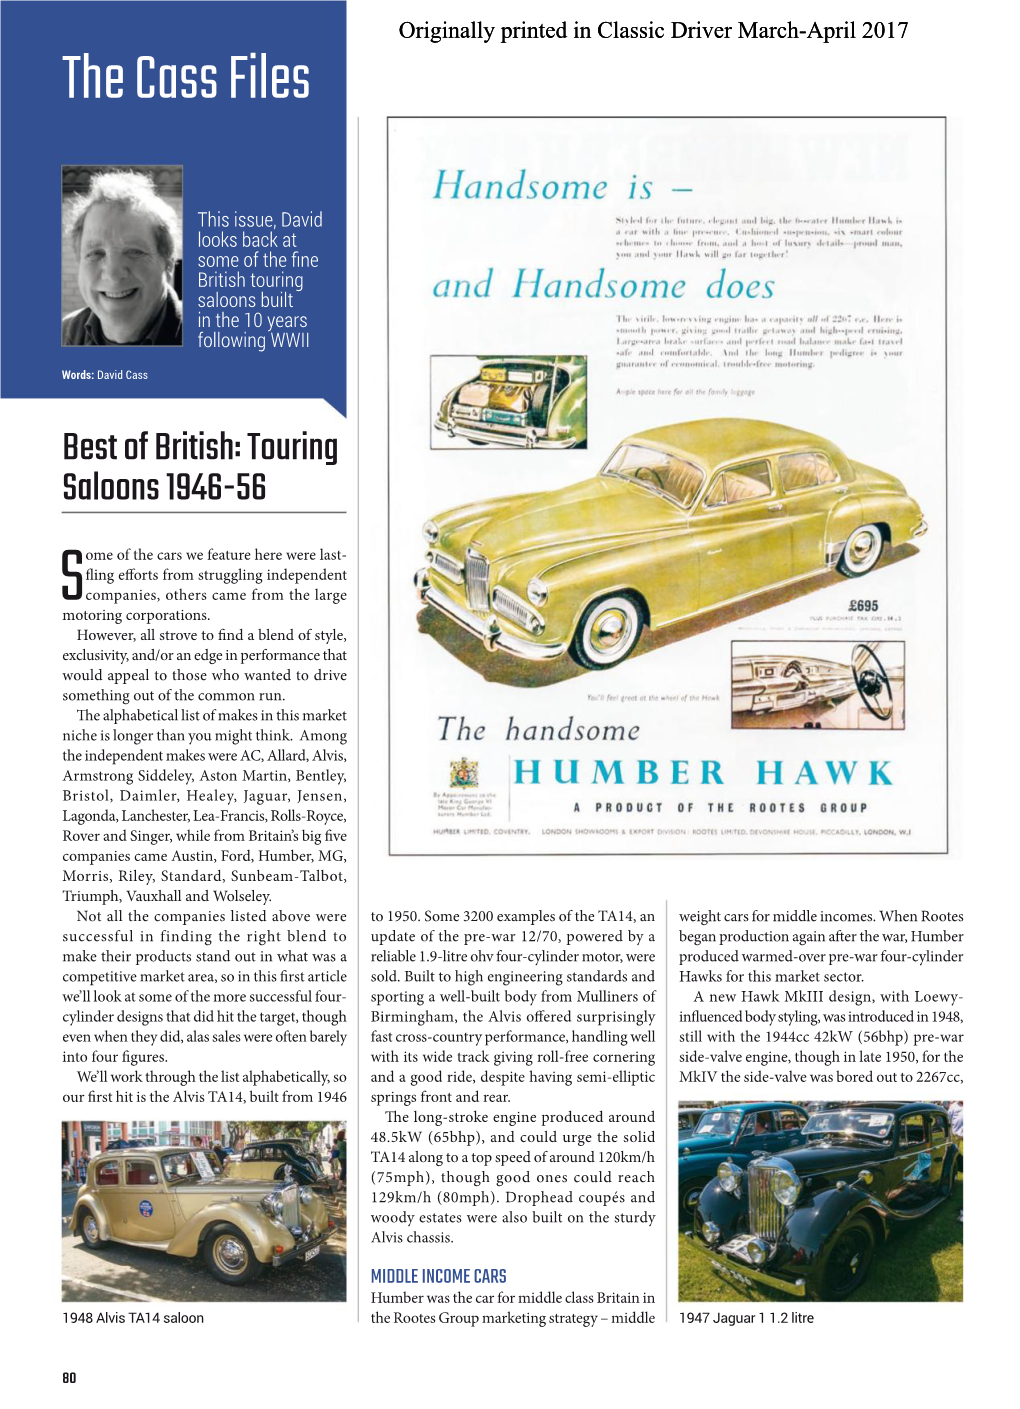 Best of British: Touring Saloons 1946-56